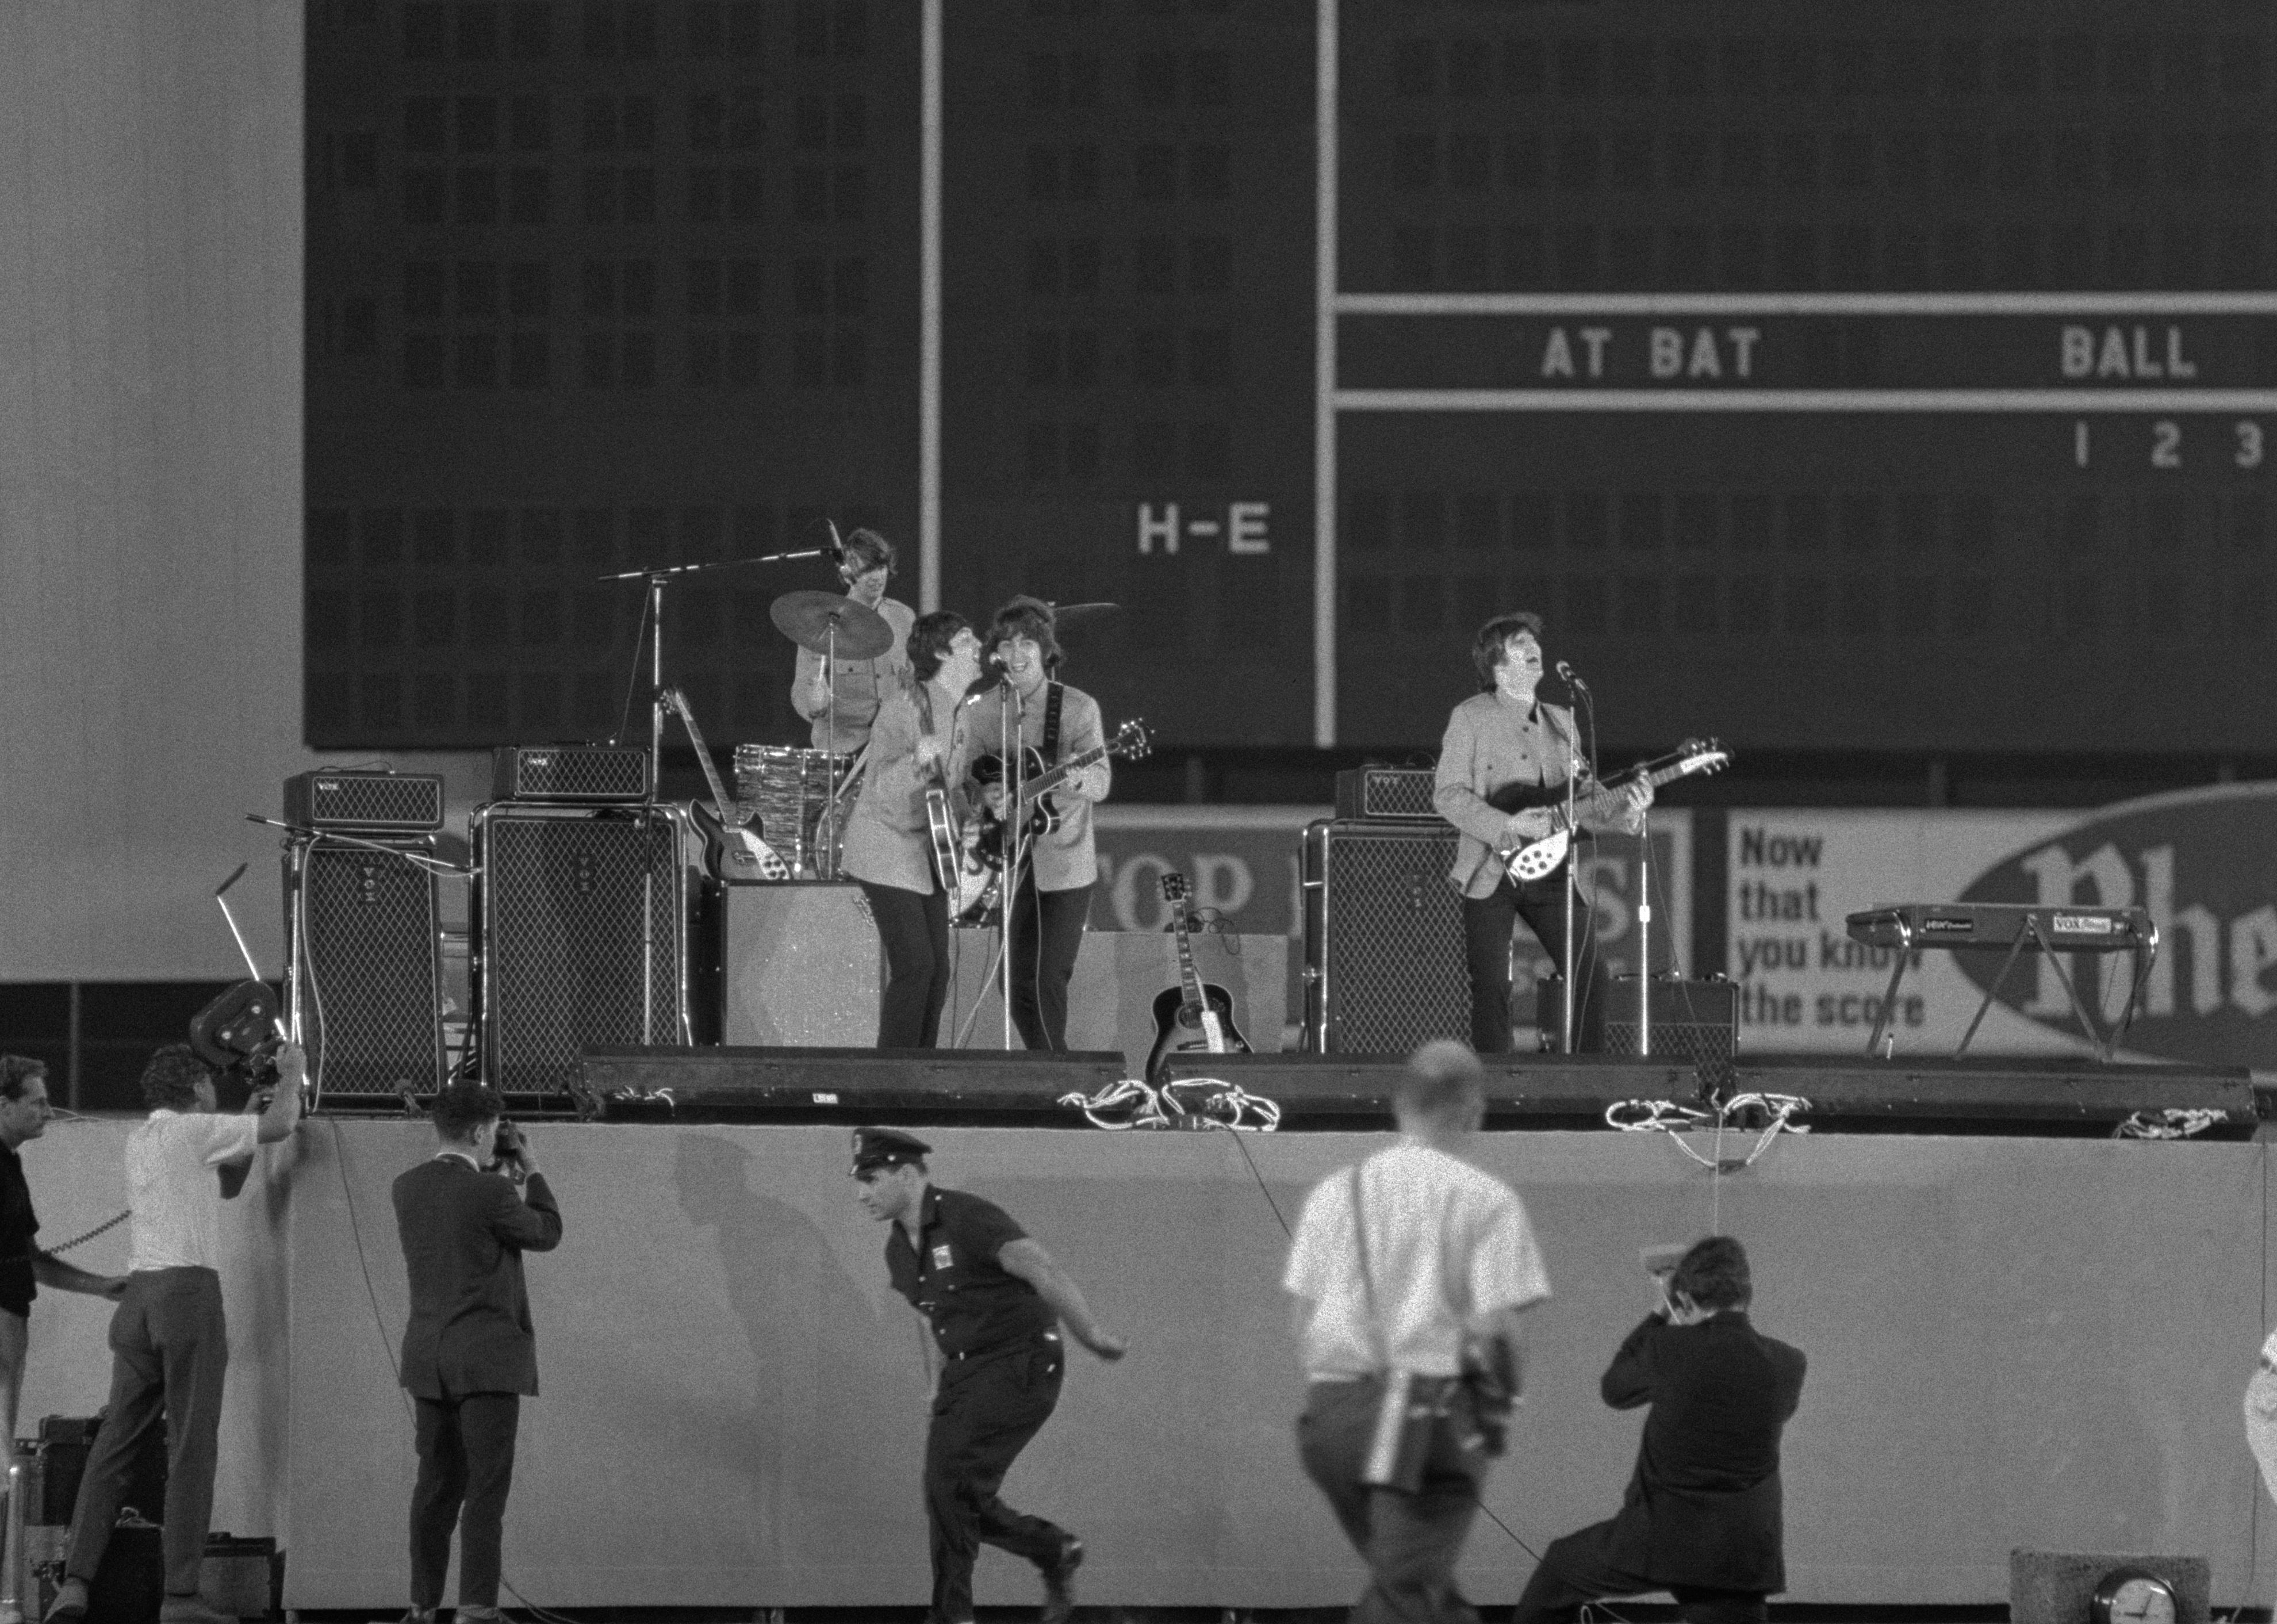 <p>This historic performance by the Fab Four drew over 55,000 attendees, making it the <a href="https://nj1015.com/50-years-ago-the-beatles-invaded-shea-stadium/">largest concert to date</a>. Fans were screaming with such volume and intensity that the group could barely hear themselves play. John Lennon later said, "At Shea Stadium, I saw the top of the mountain."</p>